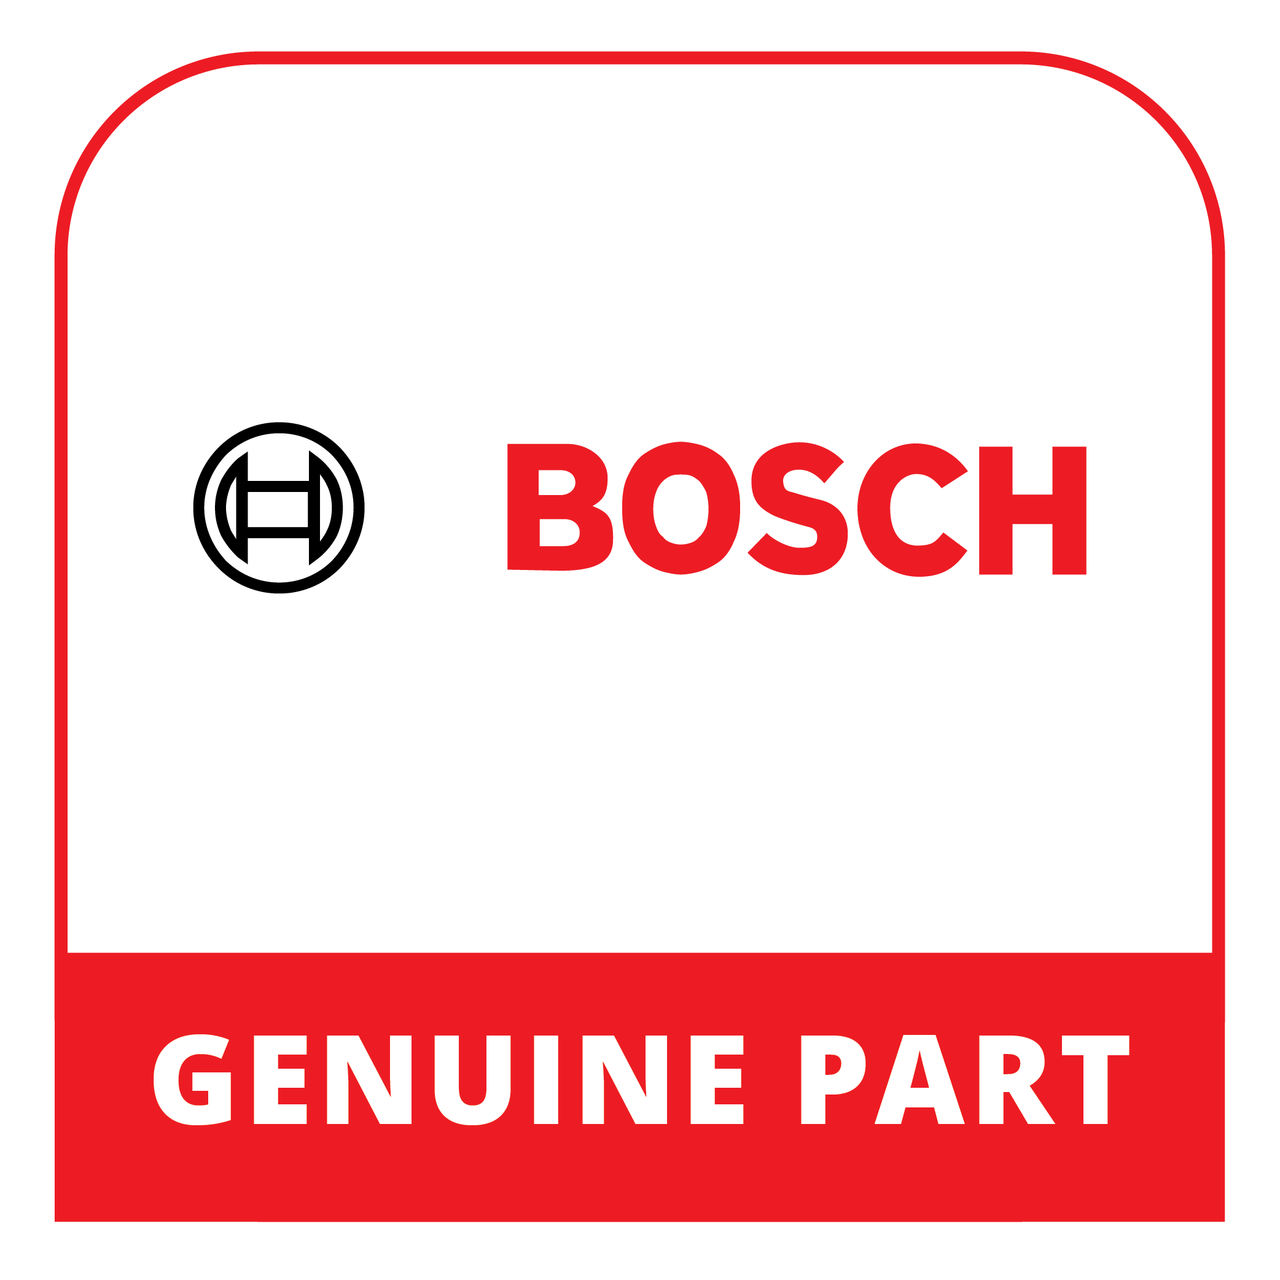 Bosch (Thermador) 11030725 - Display Module Programmed - Genuine Bosch (Thermador) Part